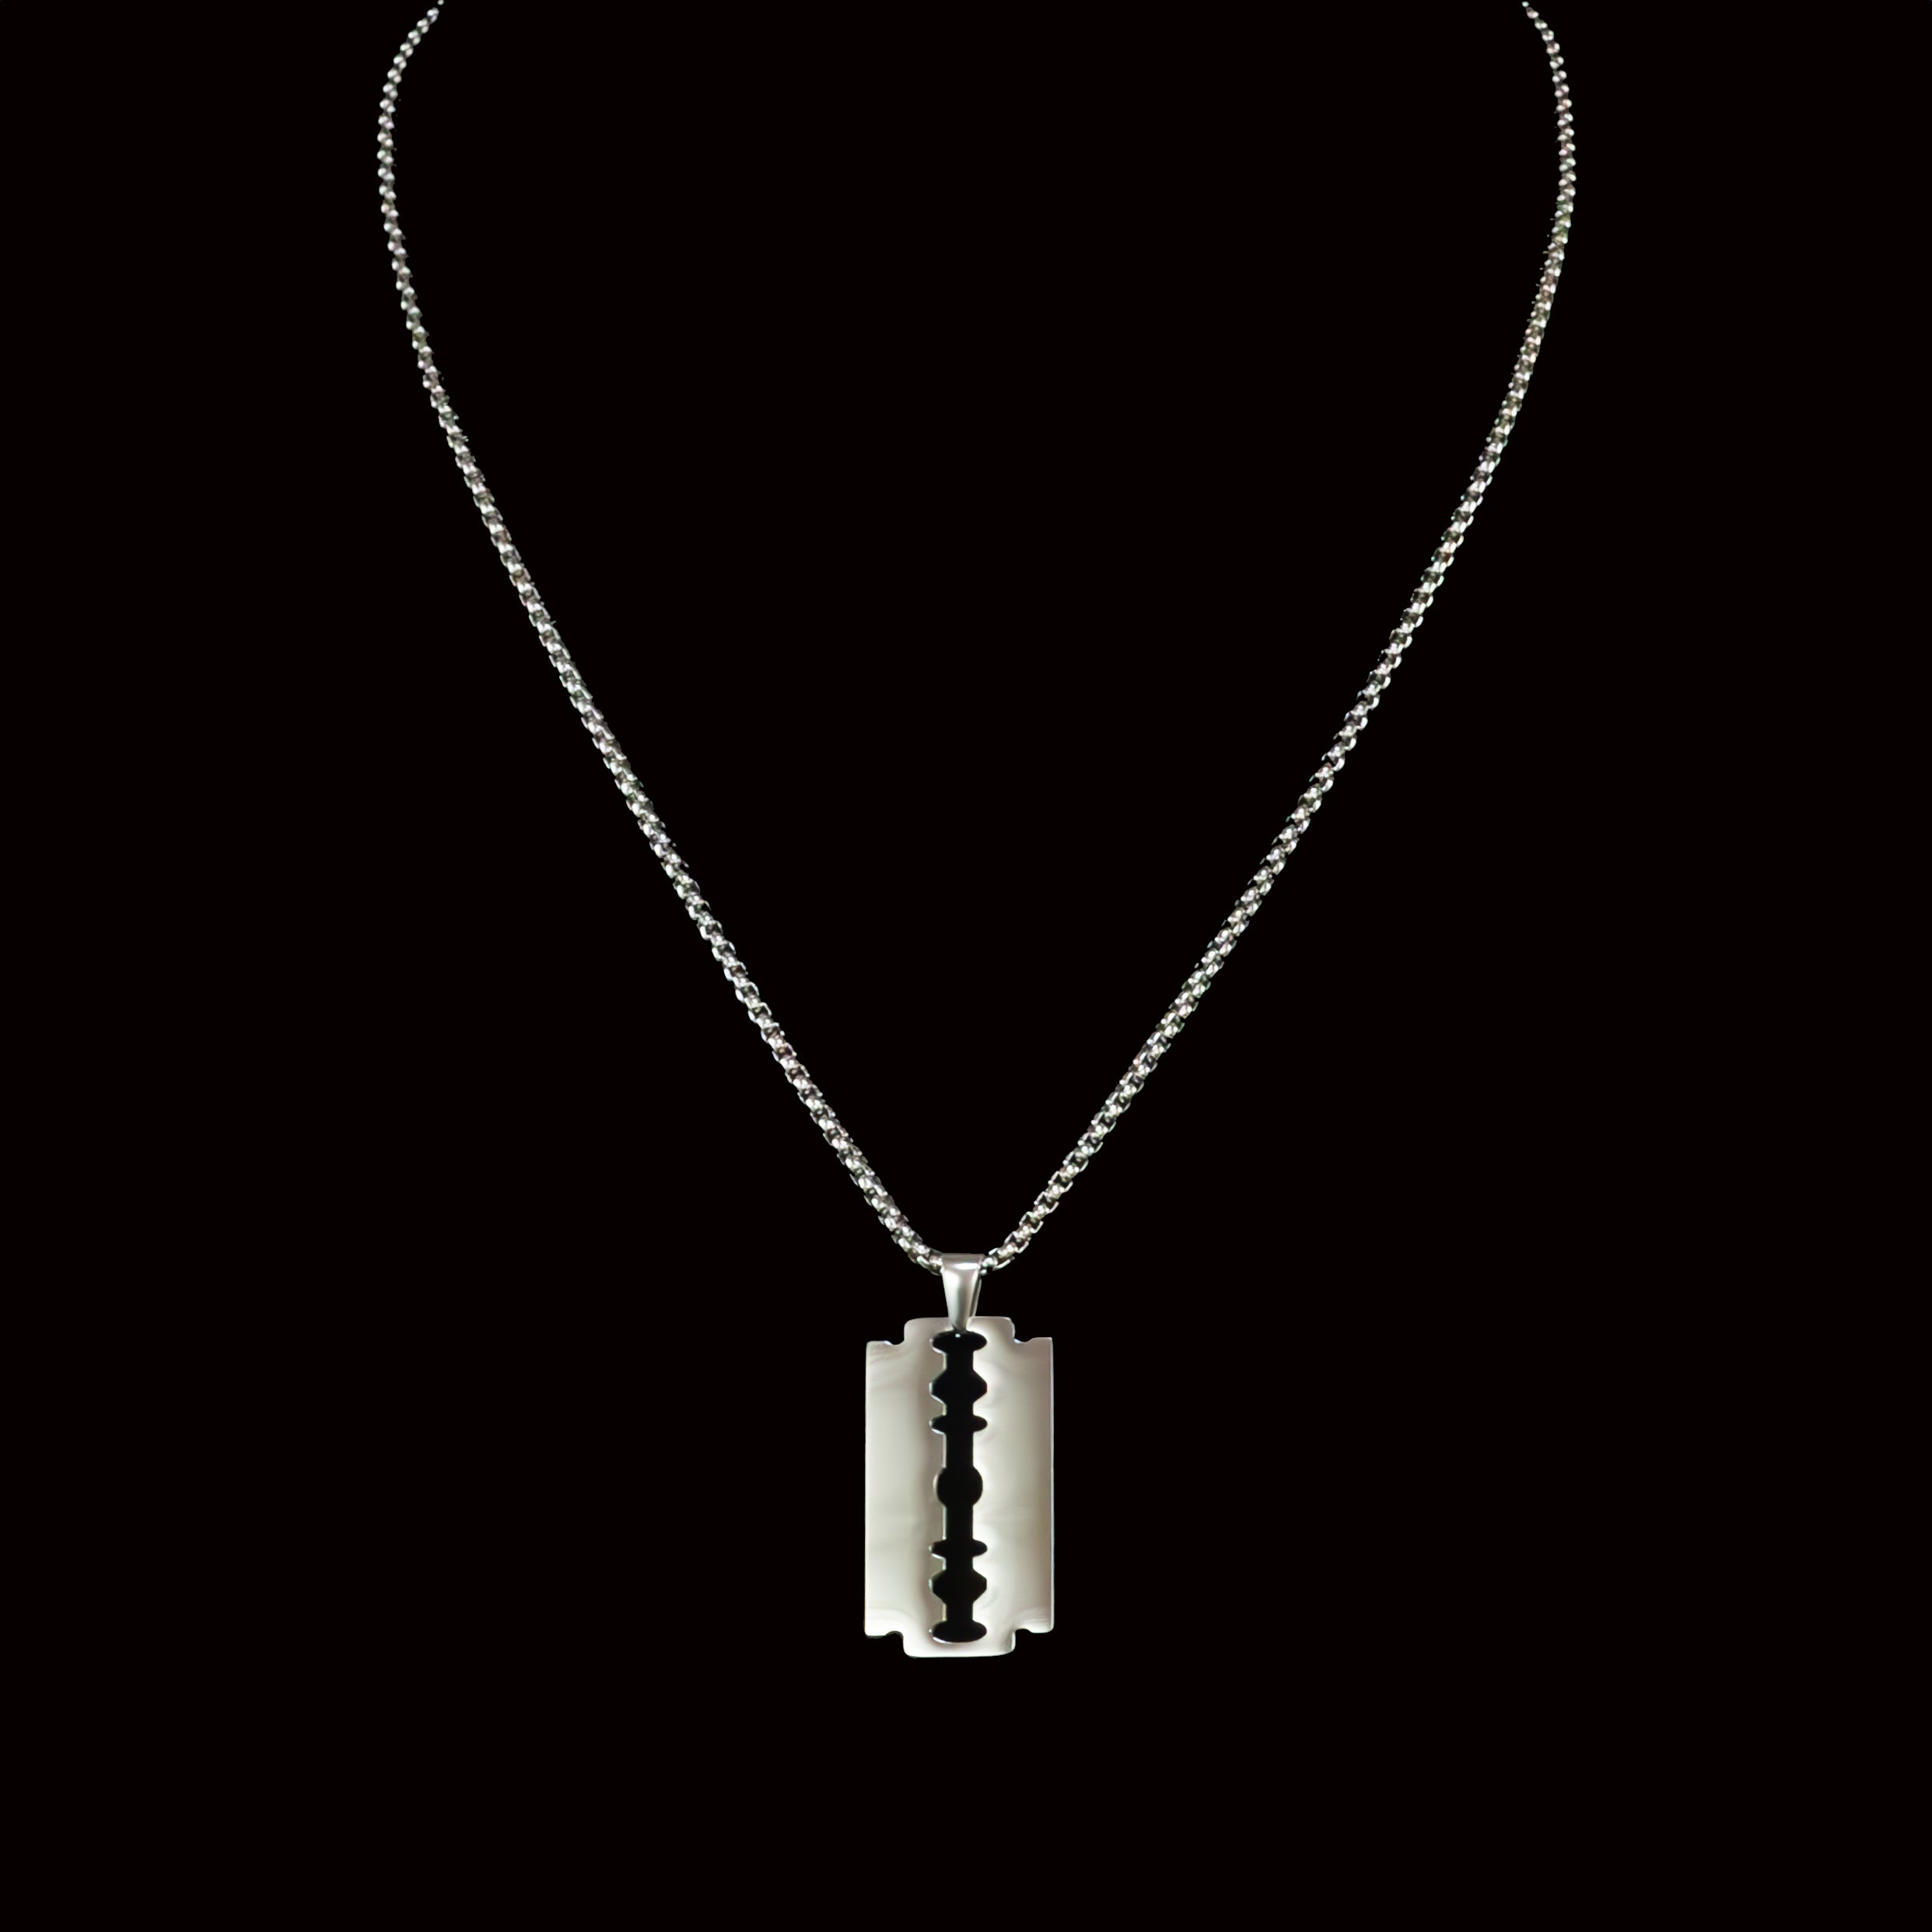 Fernán Stainless Steel Chain Necklace with Razor Blade Pendant